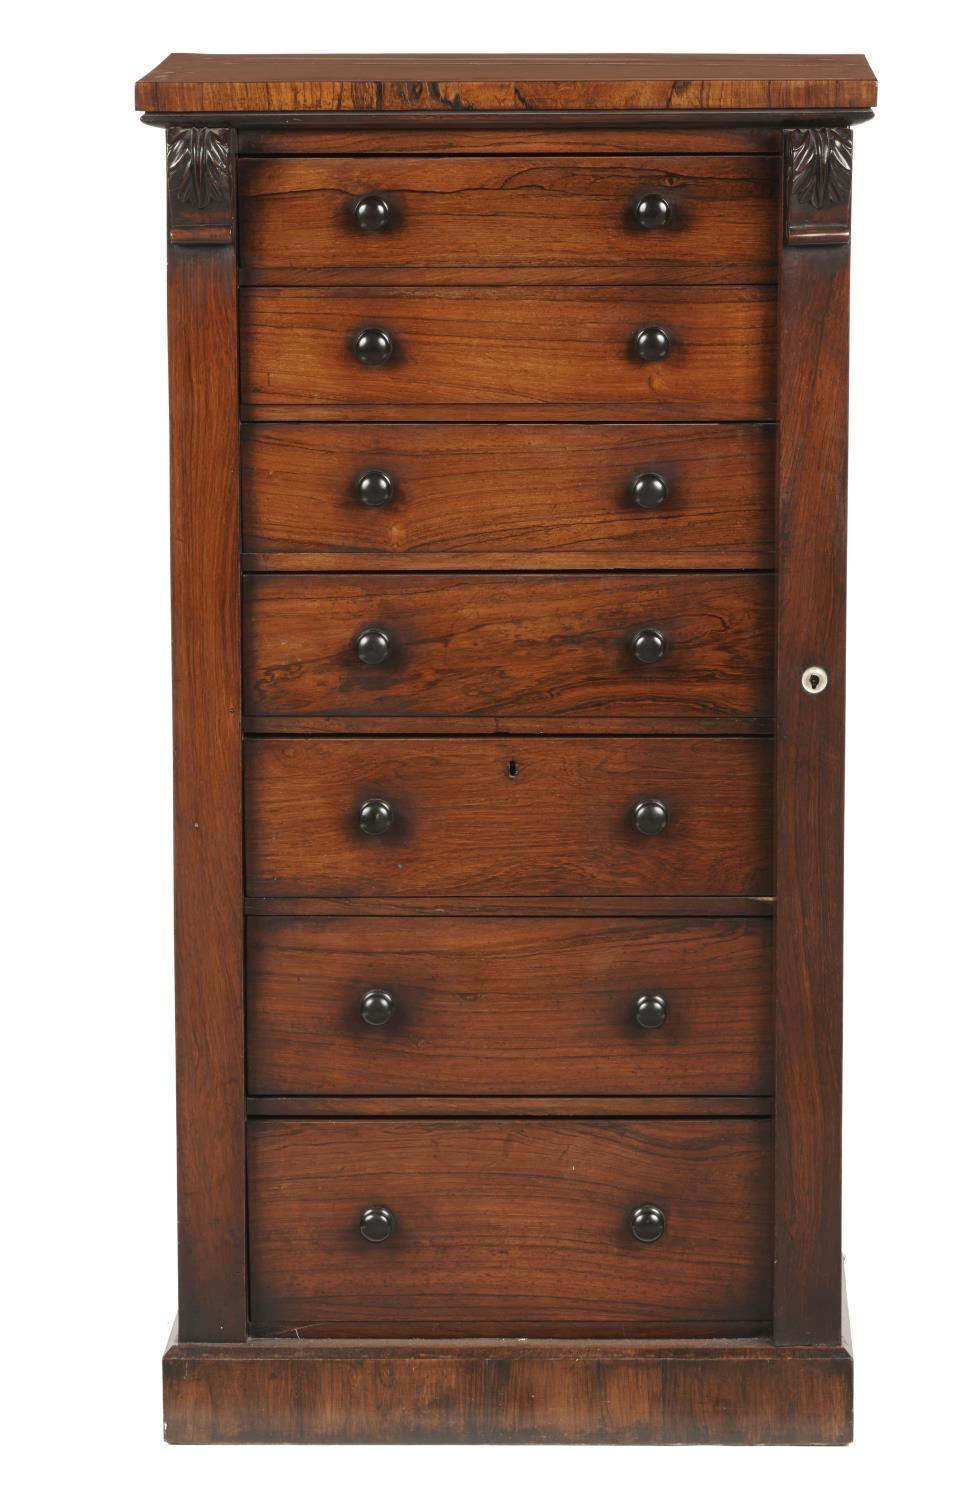 A VICTORIAN ROSEWOOD WELLINGTON CHEST, C1850 the seven graduated drawers with ebony knobs flanked by